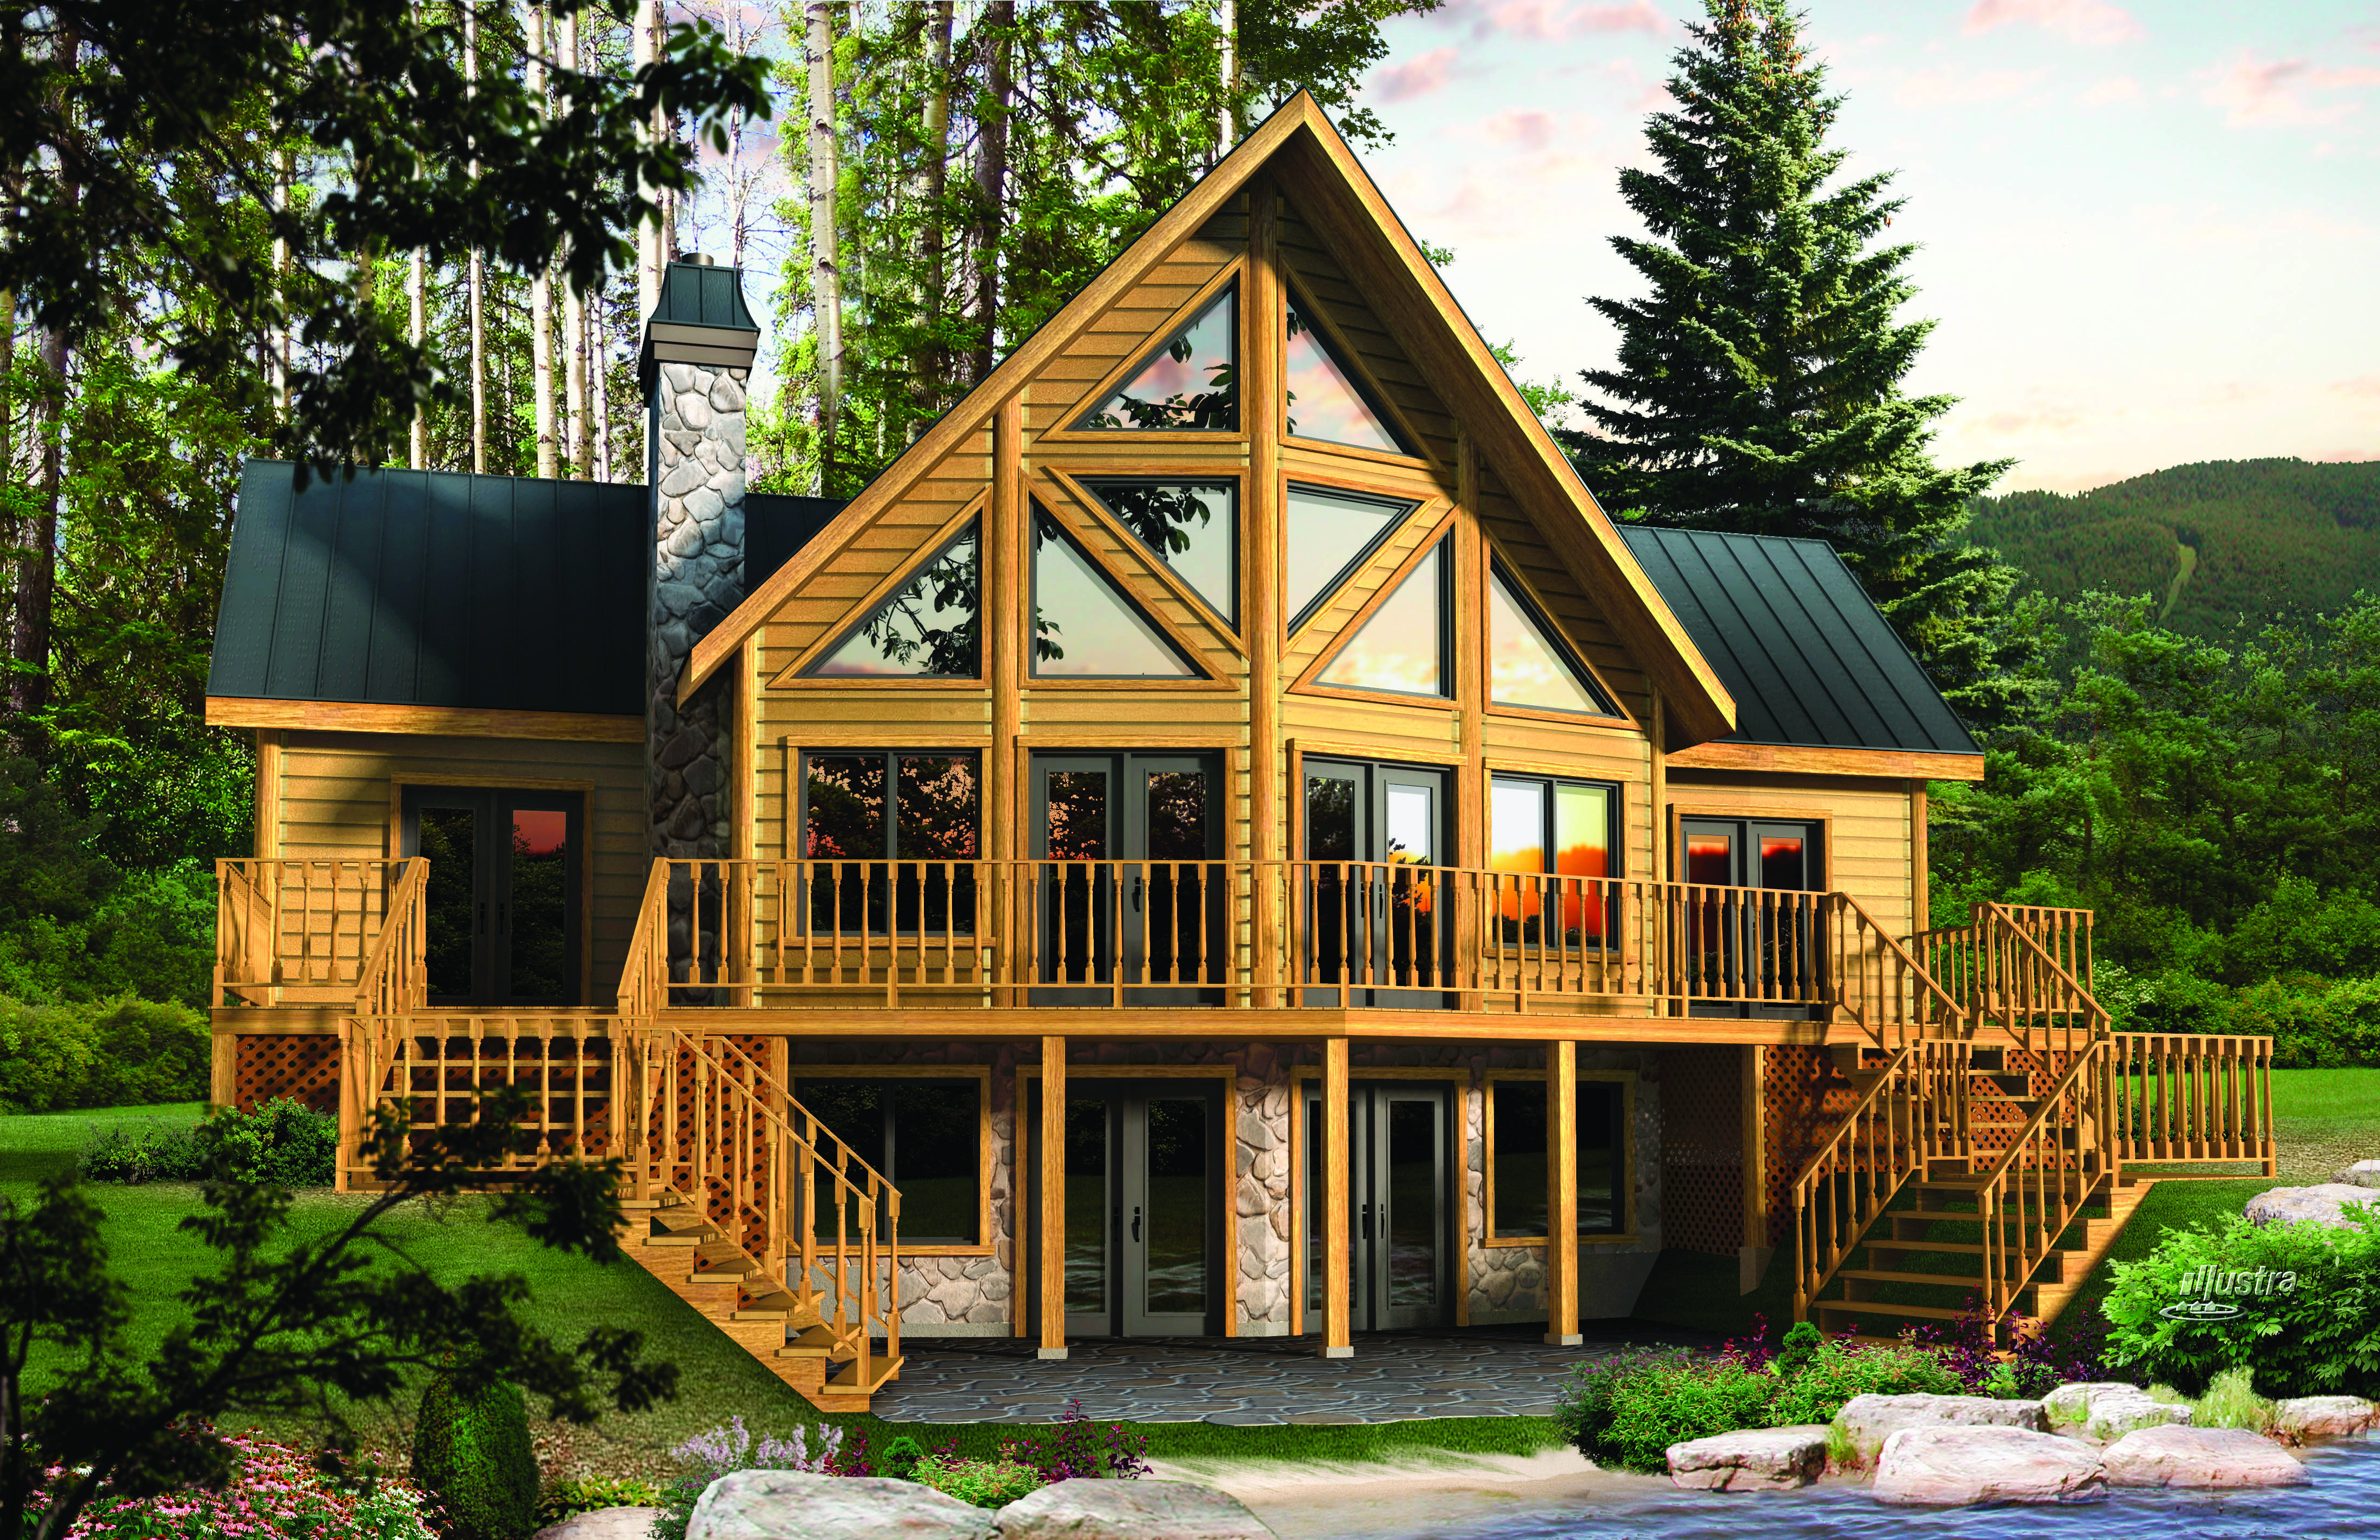 Top 20 Plans 15002000 Square Feet in 2020 Log home